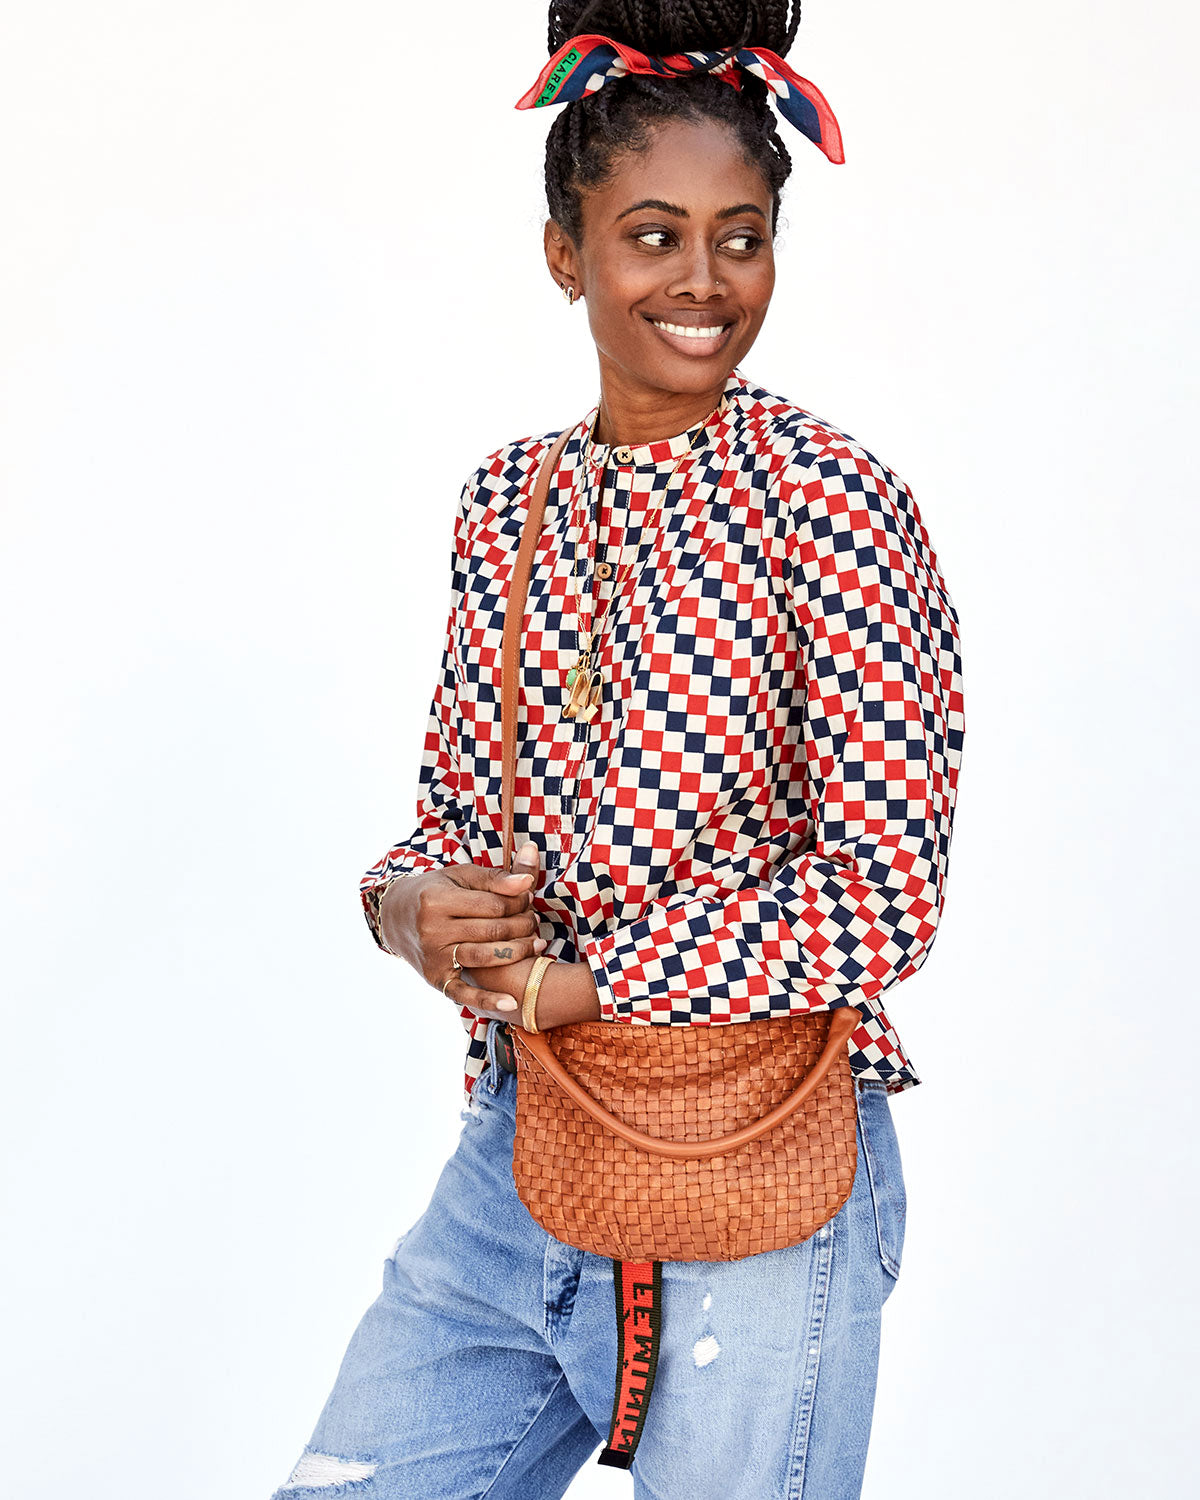 Mecca with the Red & Navy Checker Bandana in her Hair Holding the Natural Woven Checker Petit Moyen's Crossbody Strap with Both her Hands